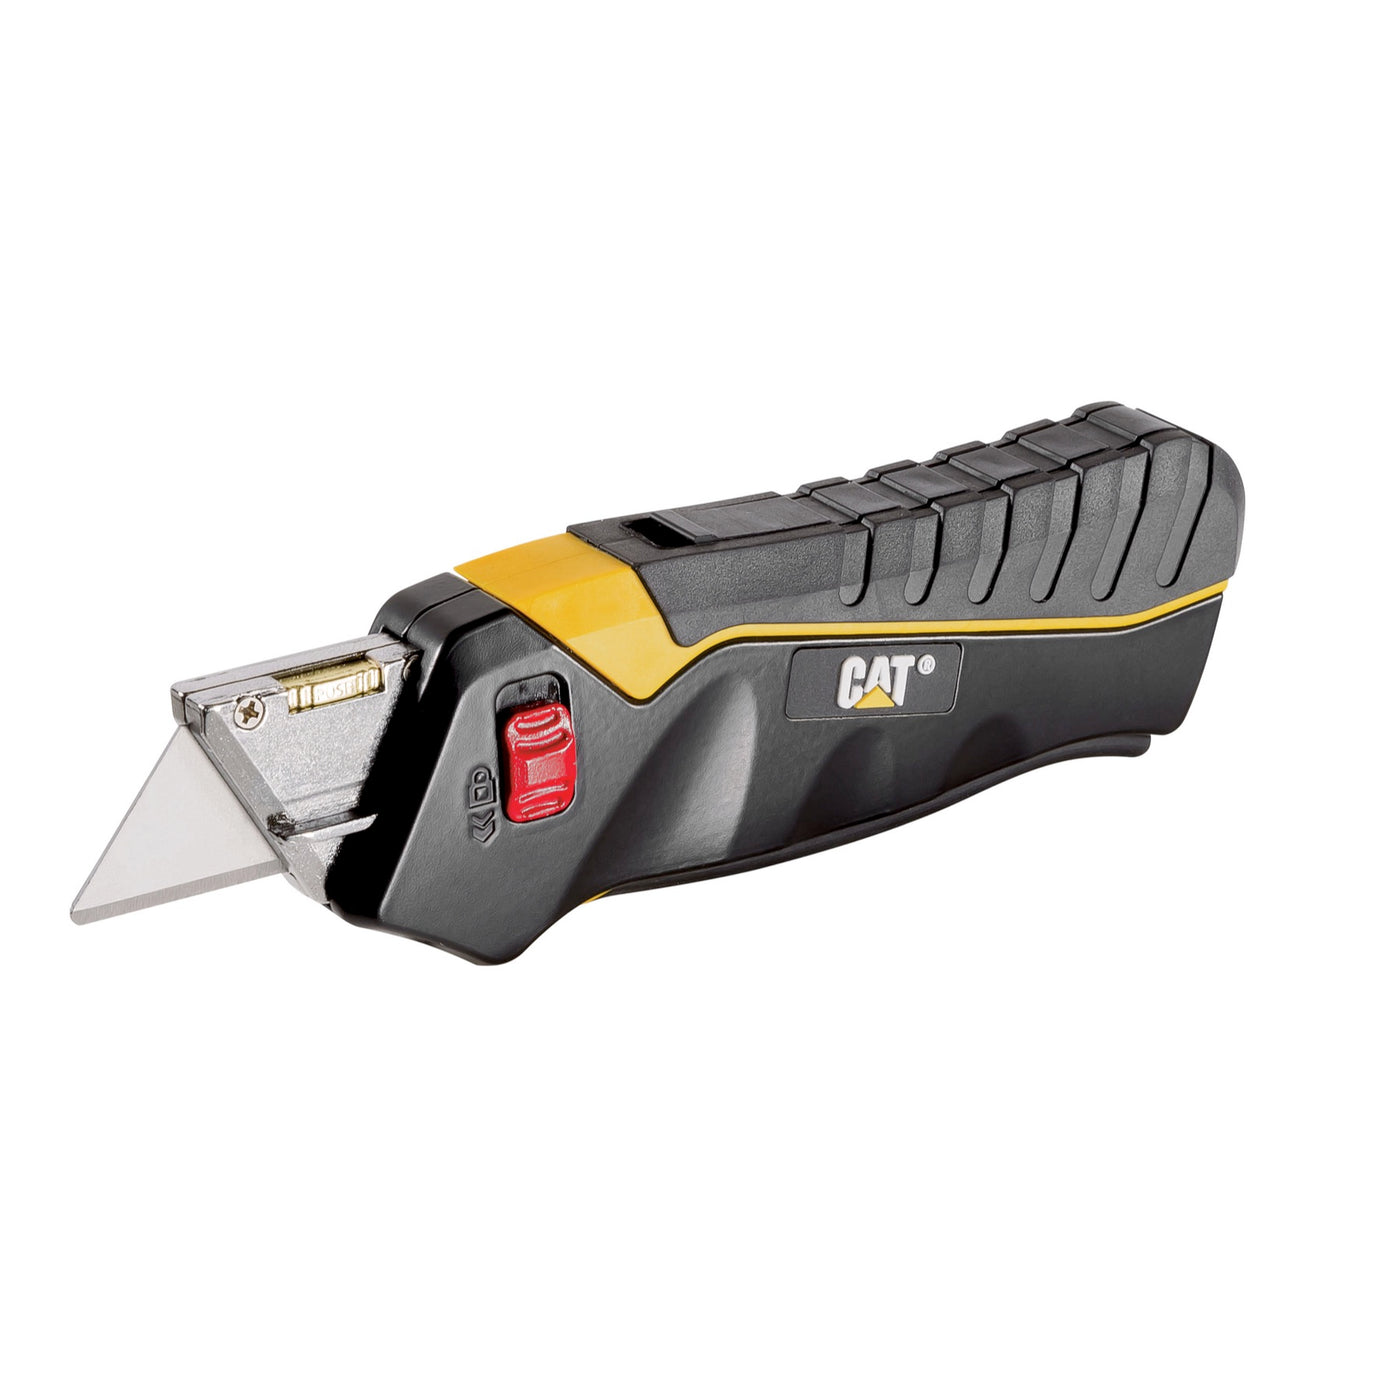 Safety Utility Knife Box Cutter Self-Retracting Blade with 3